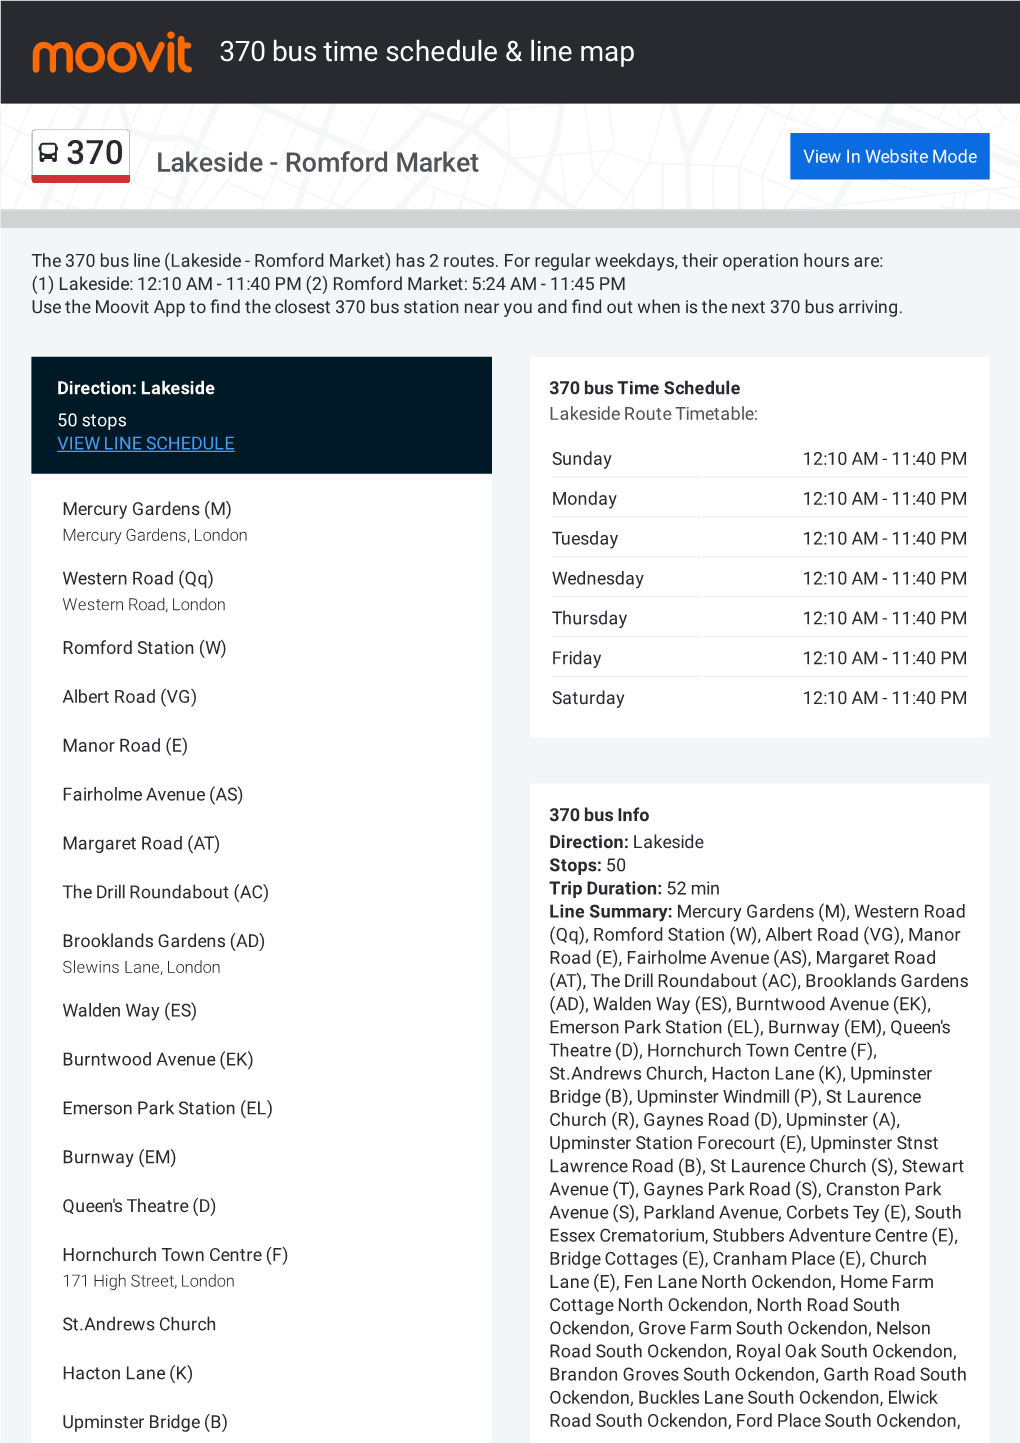 370 Bus Time Schedule & Line Route